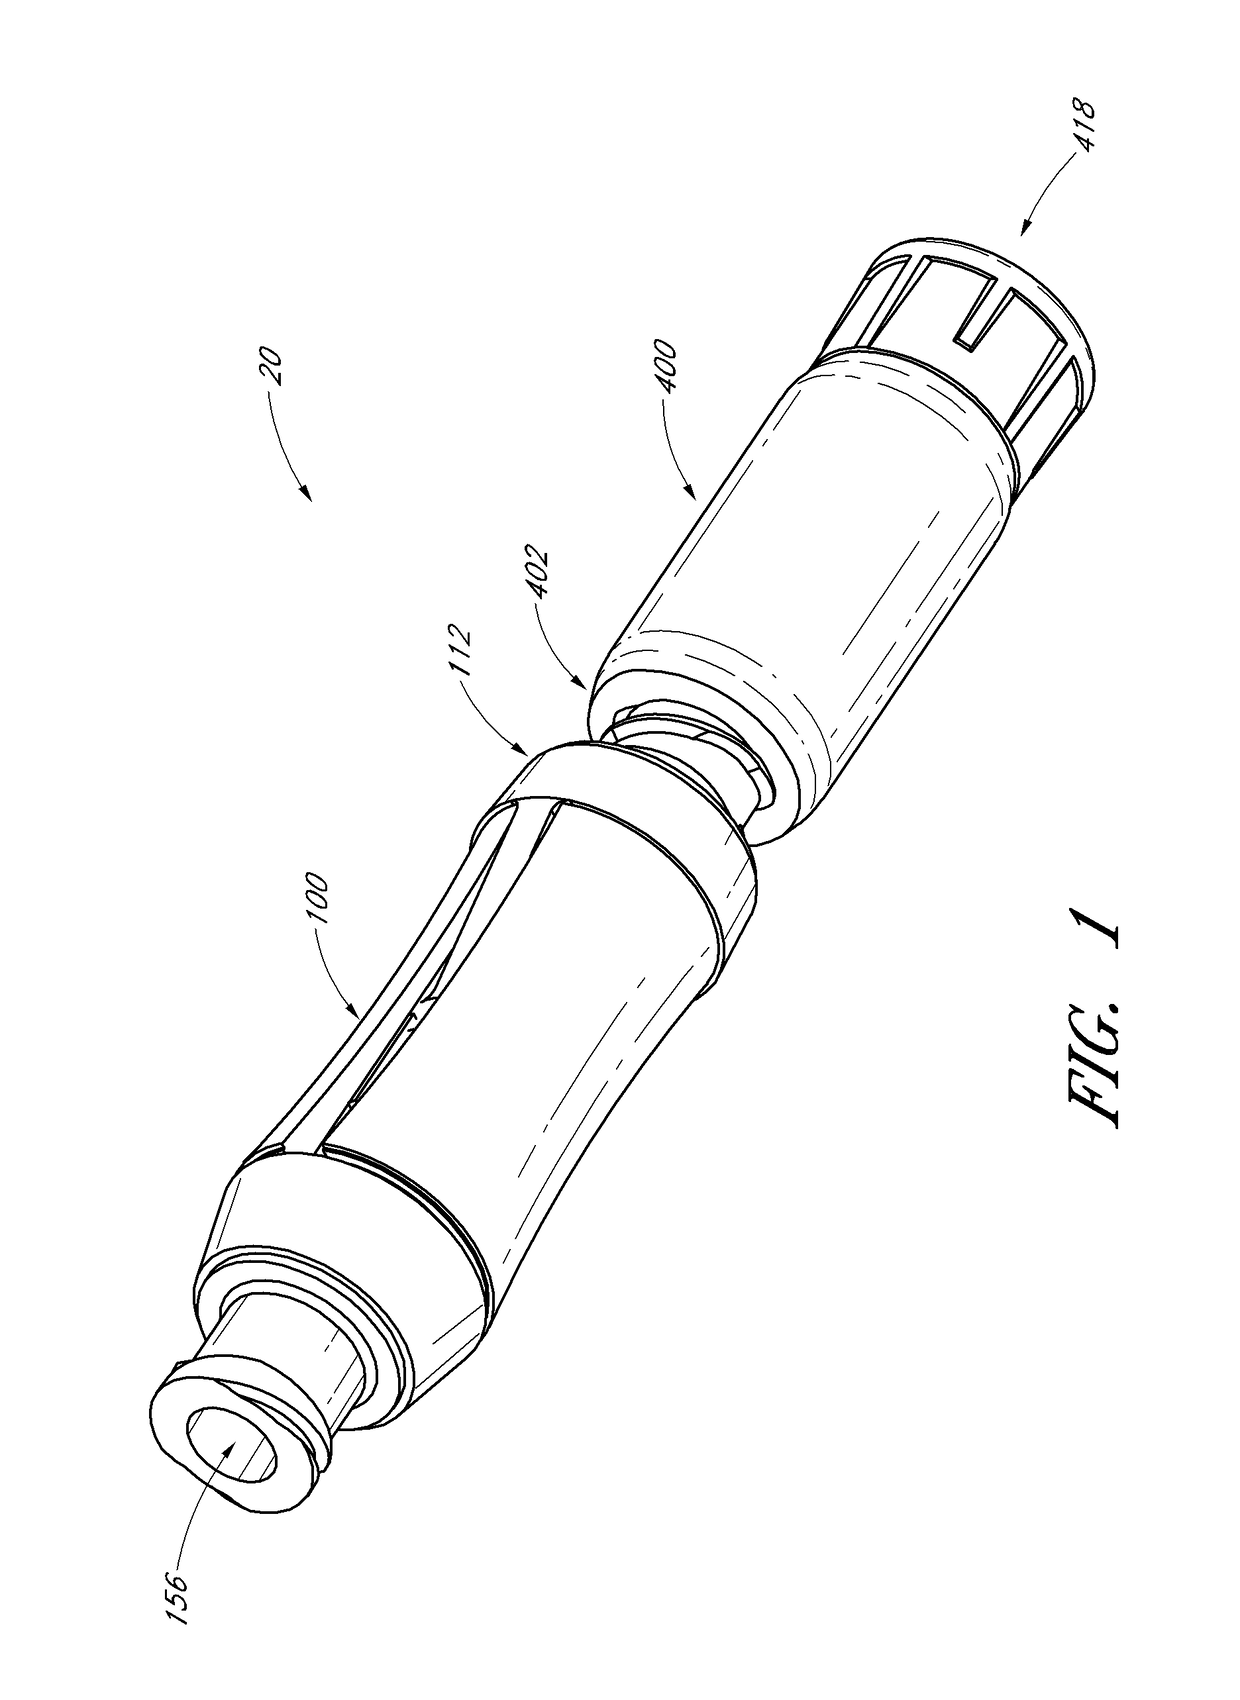 Medical connectors with fluid-resistant mating interfaces